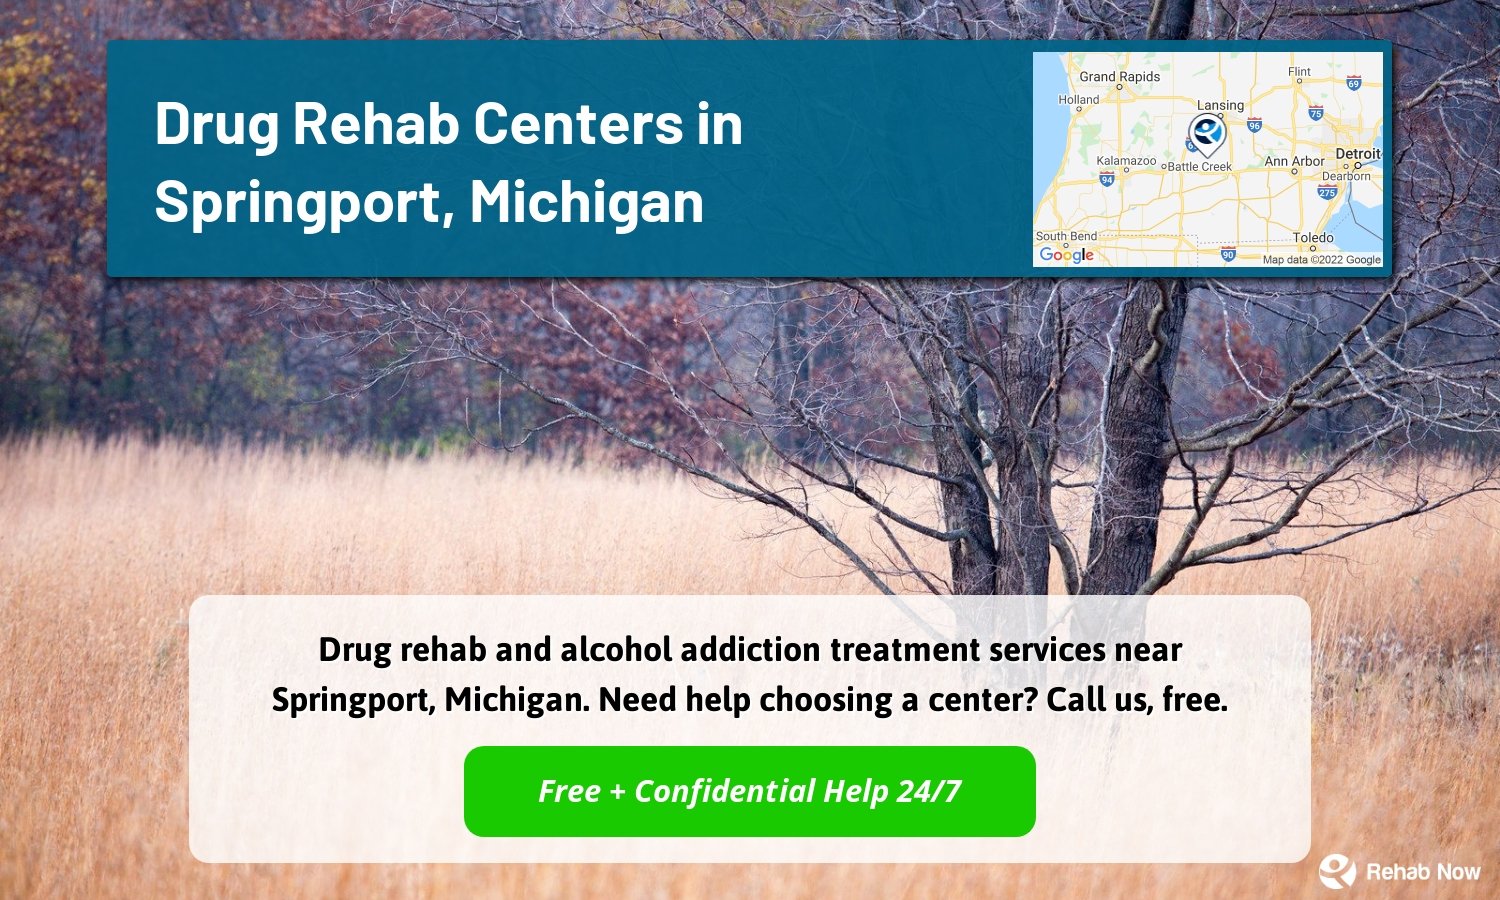 Drug rehab and alcohol addiction treatment services near Springport, Michigan. Need help choosing a center? Call us, free.